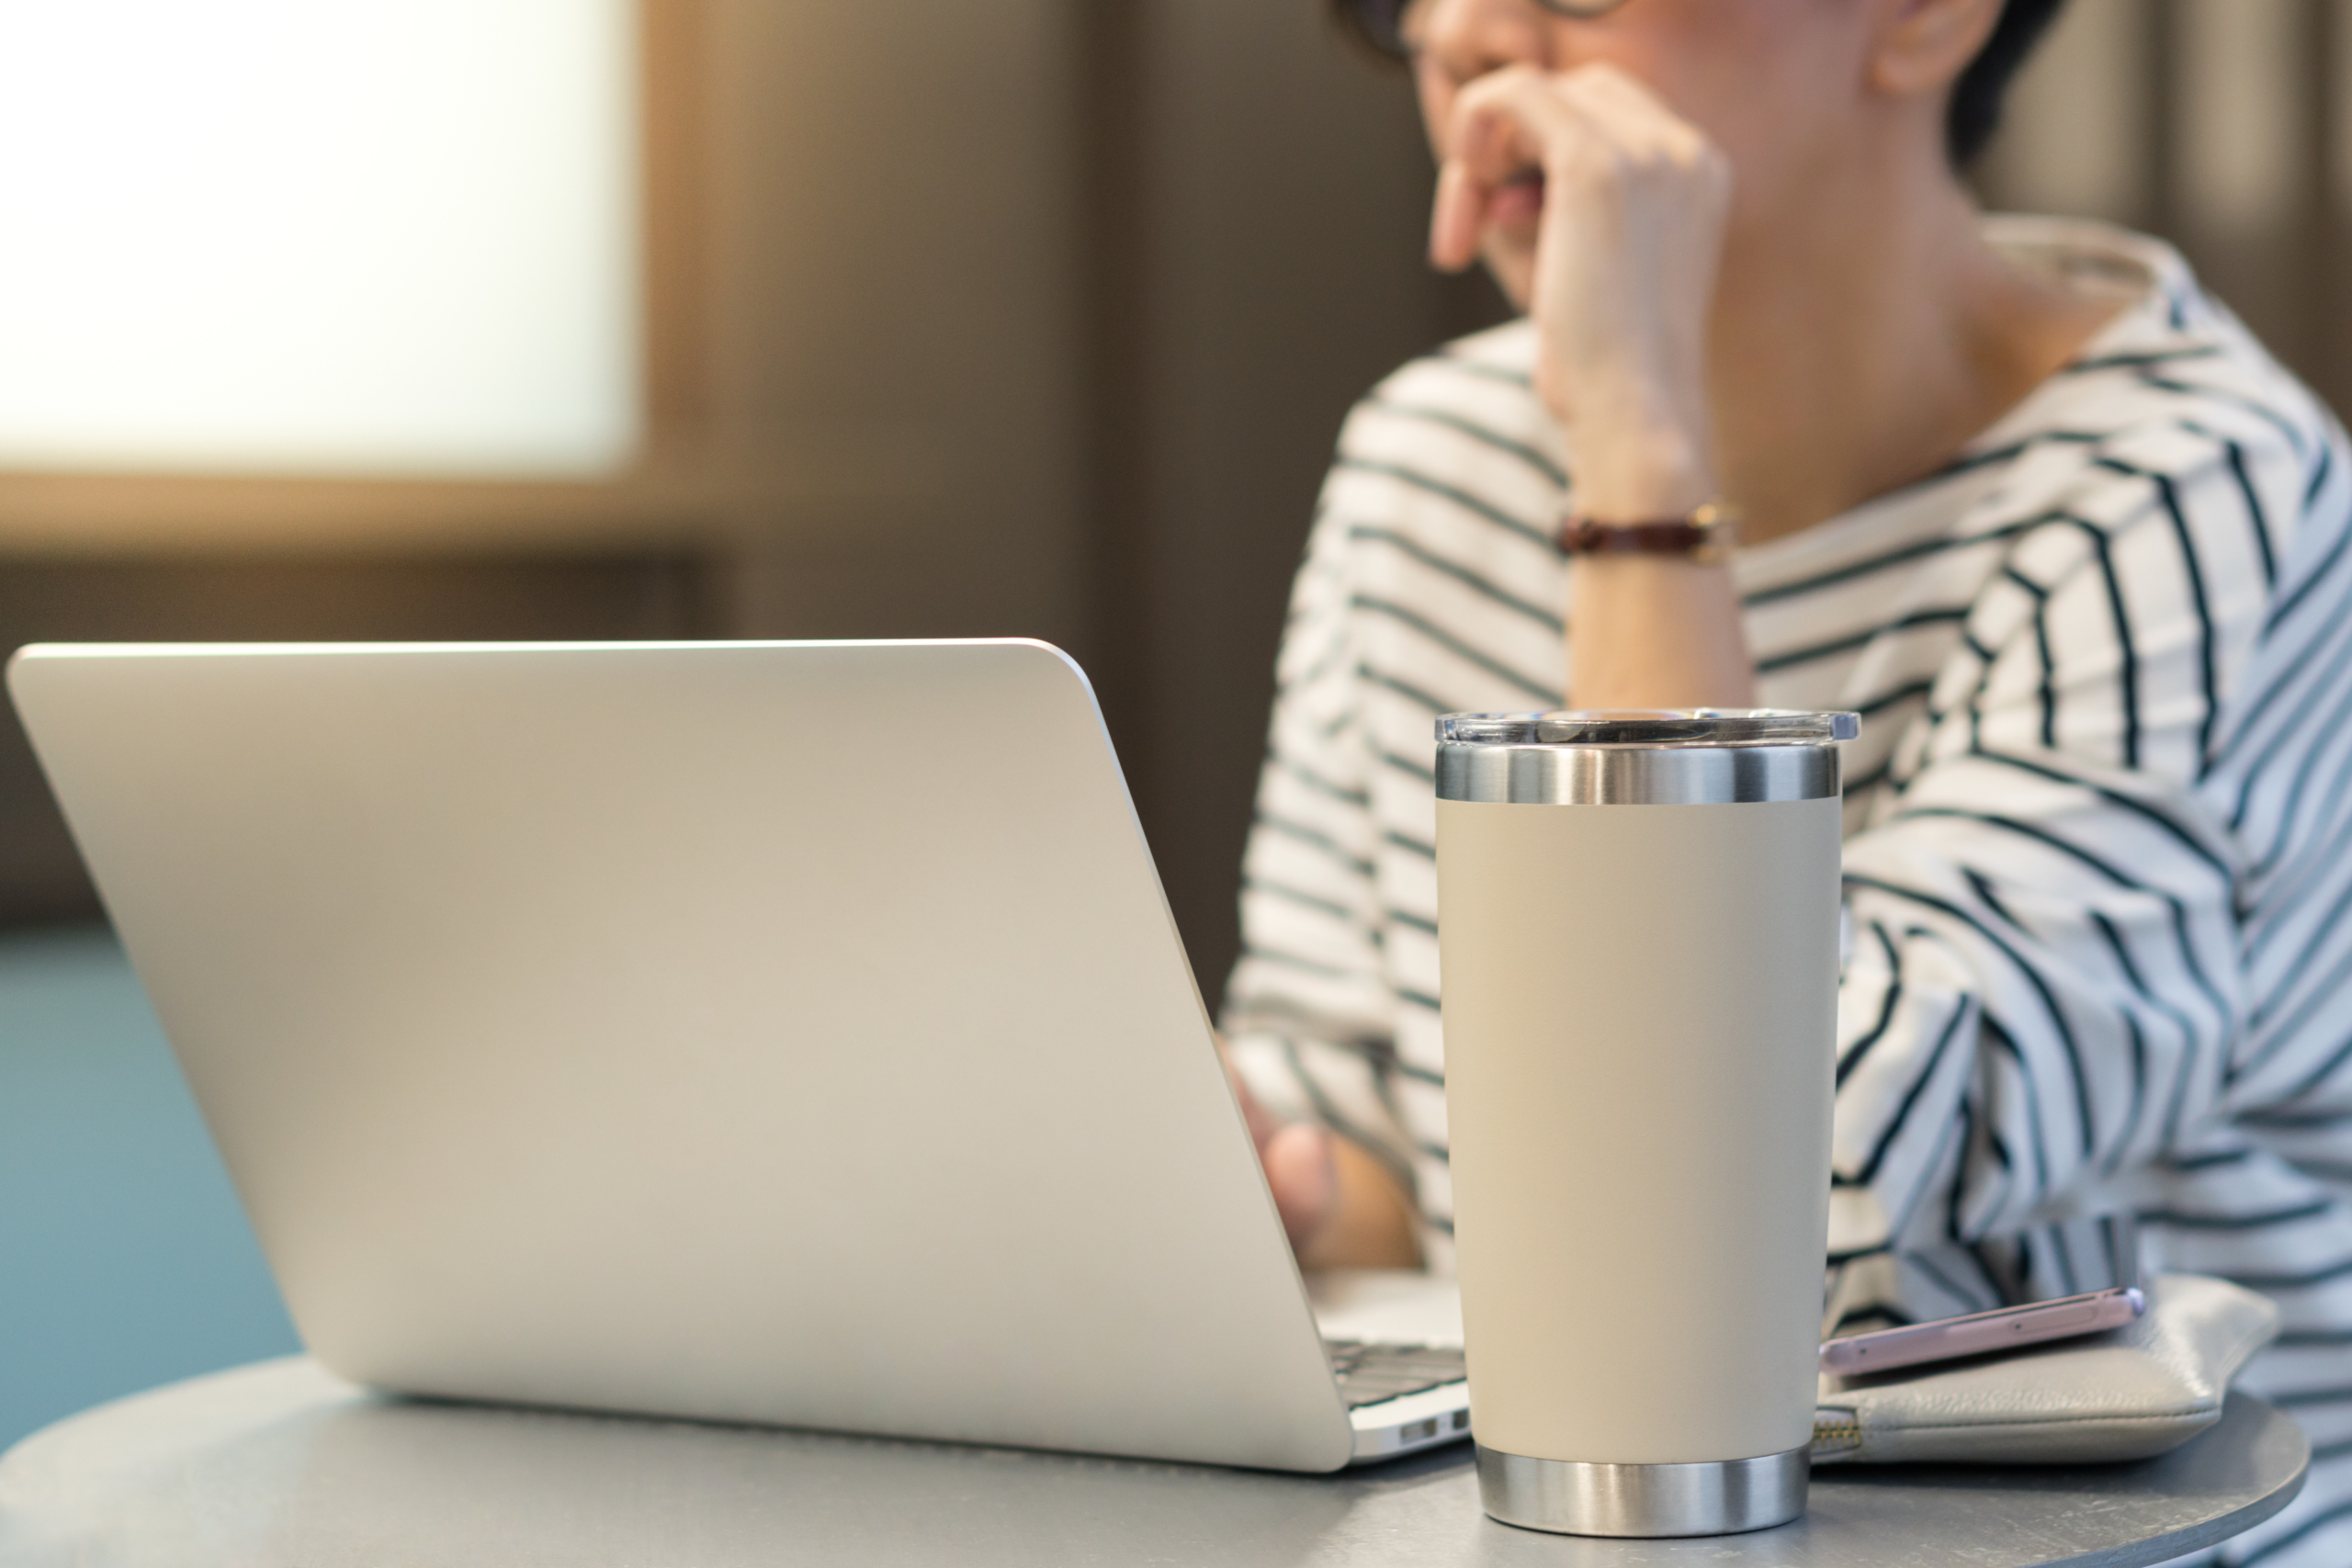 Smart looking woman use laptop computer to work from home due to Covid-19 pandemic, city lockdown and social distancing with her drink in a reusable stainless steel tumbler mug aside.